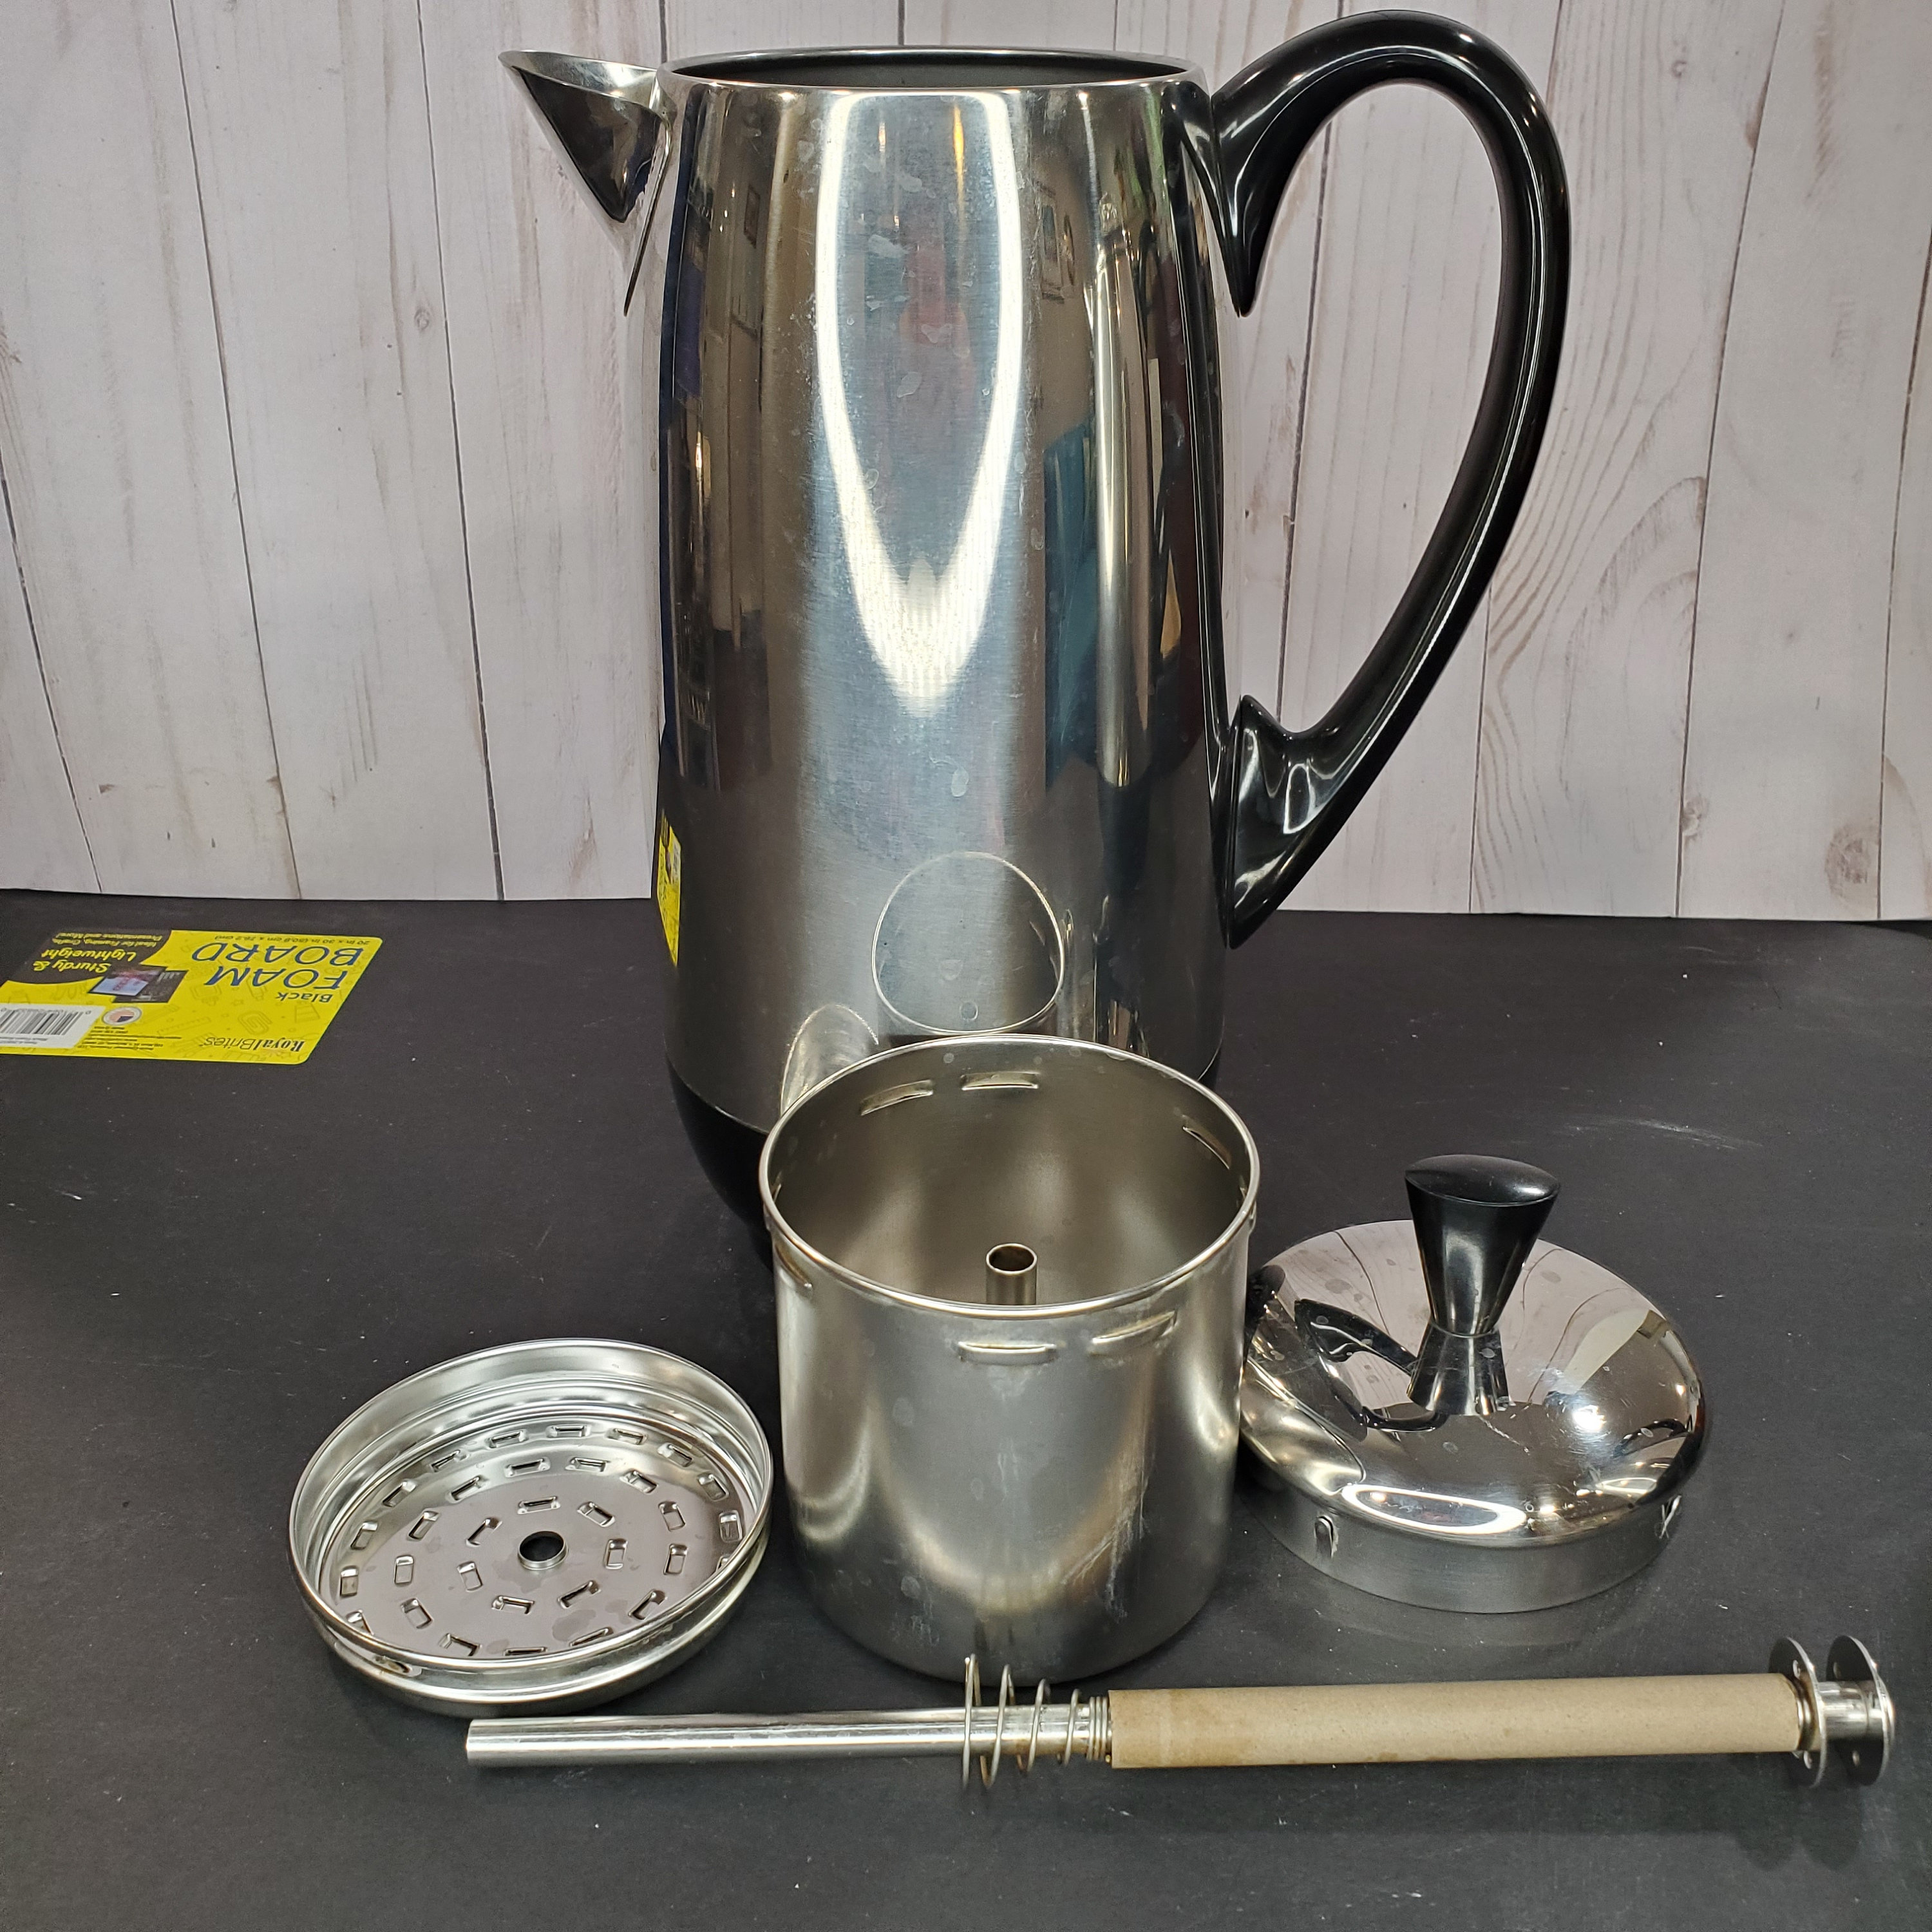 Vintage Farberware 12 Cup Electric Percolator Coffee Pot Stainless